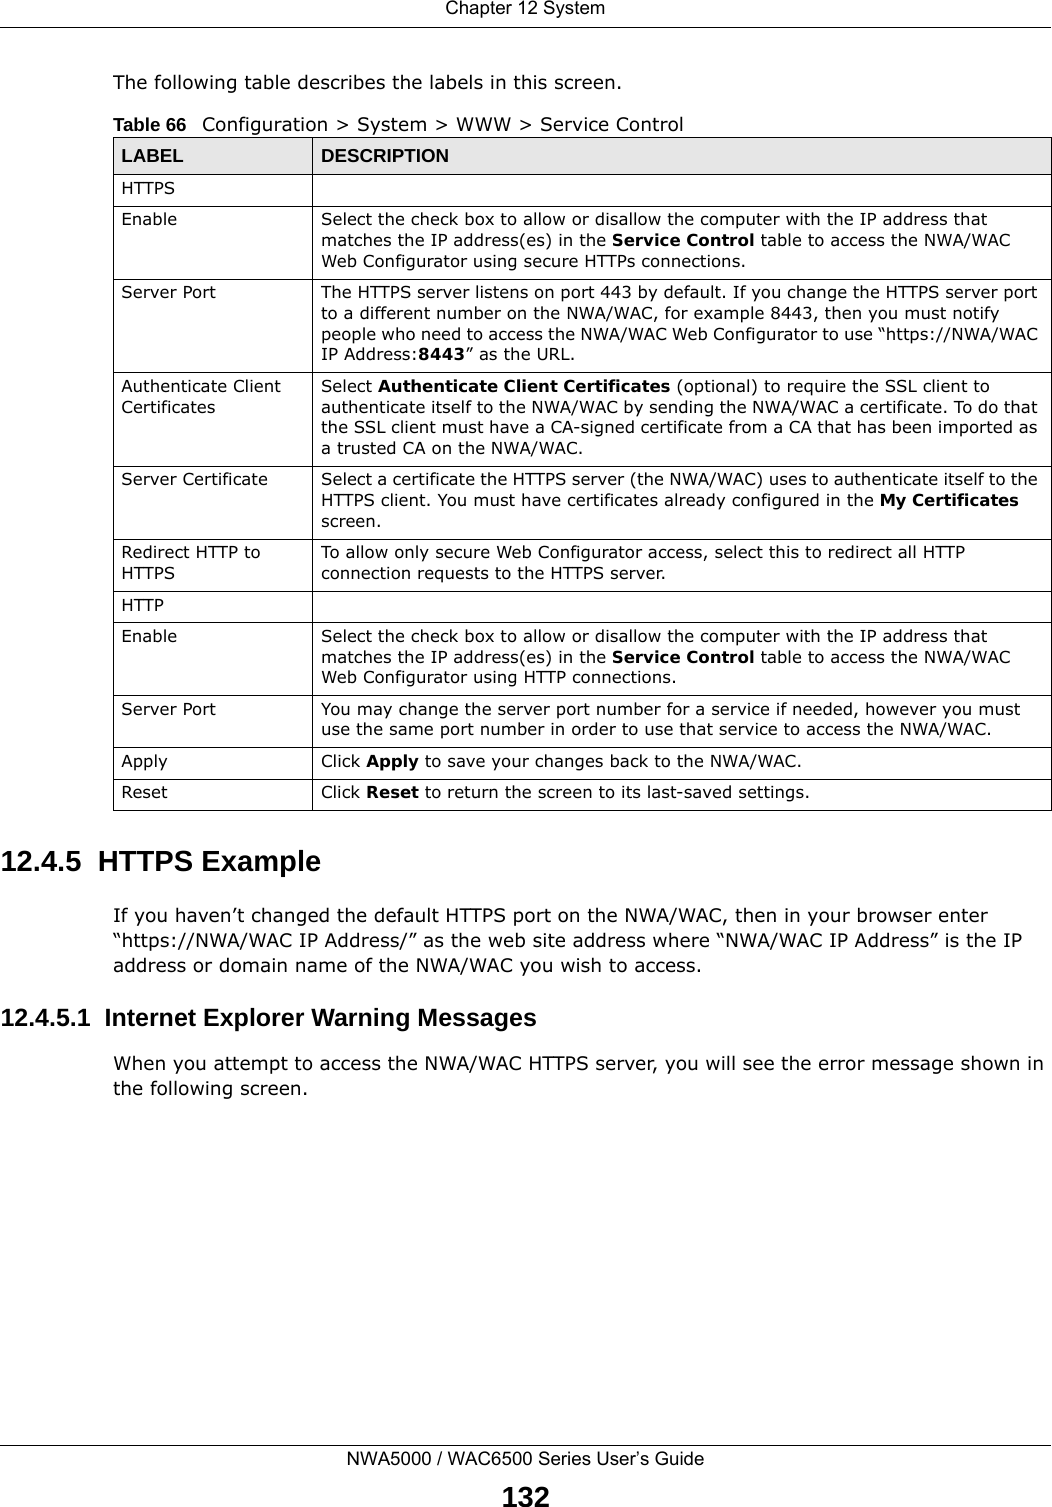 Chapter 12 SystemNWA5000 / WAC6500 Series User’s Guide132The following table describes the labels in this screen.  12.4.5  HTTPS ExampleIf you haven’t changed the default HTTPS port on the NWA/WAC, then in your browser enter “https://NWA/WAC IP Address/” as the web site address where “NWA/WAC IP Address” is the IP address or domain name of the NWA/WAC you wish to access.12.4.5.1  Internet Explorer Warning MessagesWhen you attempt to access the NWA/WAC HTTPS server, you will see the error message shown in the following screen.Table 66   Configuration &gt; System &gt; WWW &gt; Service ControlLABEL DESCRIPTIONHTTPSEnable Select the check box to allow or disallow the computer with the IP address that matches the IP address(es) in the Service Control table to access the NWA/WAC Web Configurator using secure HTTPs connections.Server Port The HTTPS server listens on port 443 by default. If you change the HTTPS server port to a different number on the NWA/WAC, for example 8443, then you must notify people who need to access the NWA/WAC Web Configurator to use “https://NWA/WAC IP Address:8443” as the URL.Authenticate Client CertificatesSelect Authenticate Client Certificates (optional) to require the SSL client to authenticate itself to the NWA/WAC by sending the NWA/WAC a certificate. To do that the SSL client must have a CA-signed certificate from a CA that has been imported as a trusted CA on the NWA/WAC.Server Certificate Select a certificate the HTTPS server (the NWA/WAC) uses to authenticate itself to the HTTPS client. You must have certificates already configured in the My Certificates screen.Redirect HTTP to HTTPS To allow only secure Web Configurator access, select this to redirect all HTTP connection requests to the HTTPS server.HTTPEnable Select the check box to allow or disallow the computer with the IP address that matches the IP address(es) in the Service Control table to access the NWA/WAC Web Configurator using HTTP connections.Server Port You may change the server port number for a service if needed, however you must use the same port number in order to use that service to access the NWA/WAC.Apply Click Apply to save your changes back to the NWA/WAC. Reset Click Reset to return the screen to its last-saved settings. 